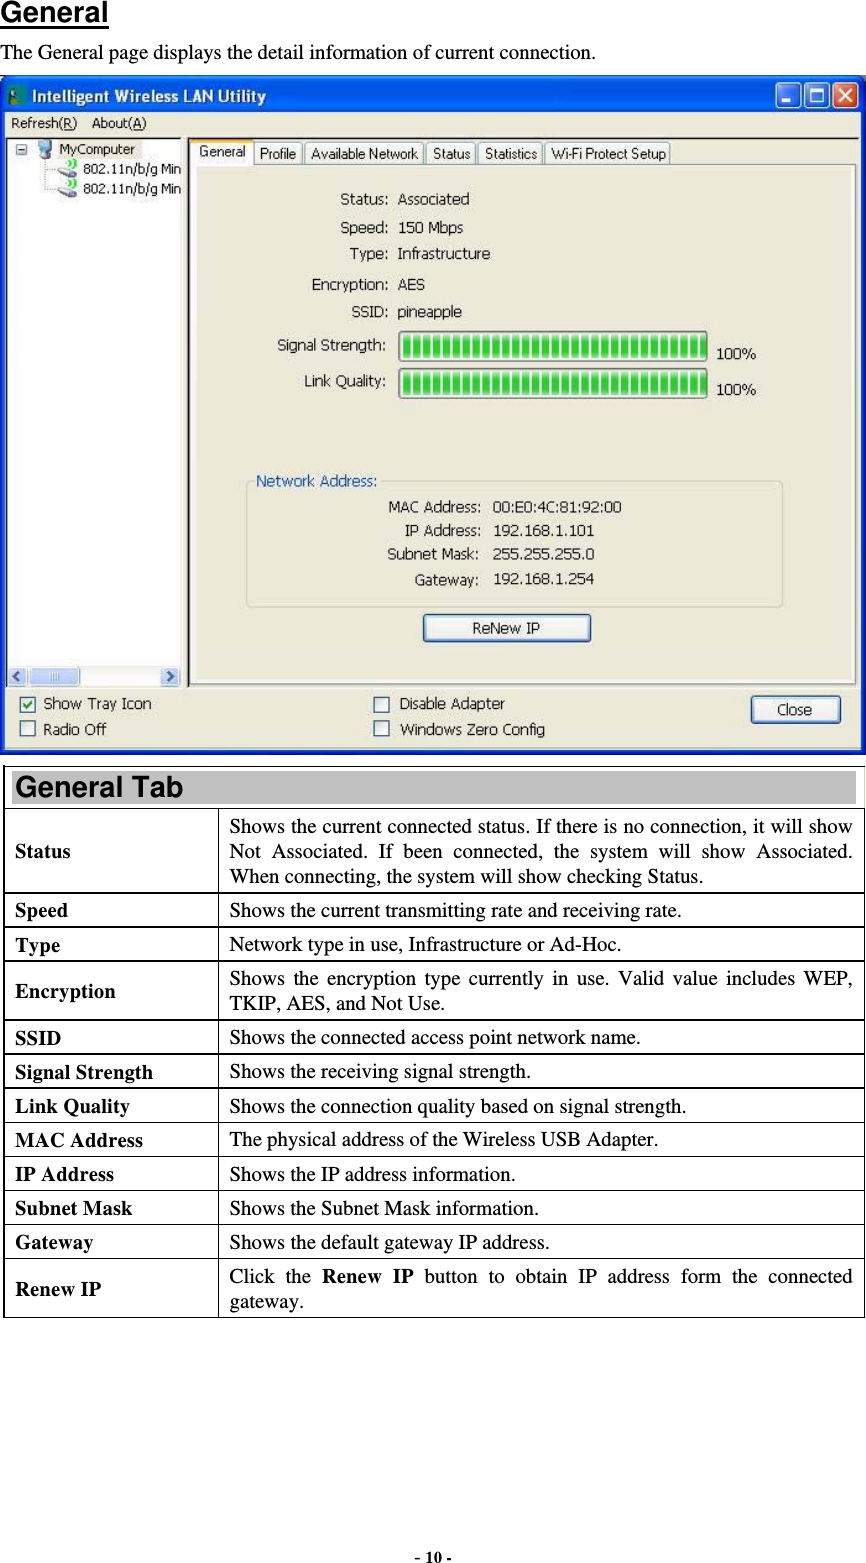  - 10 - General The General page displays the detail information of current connection.  General Tab Status Shows the current connected status. If there is no connection, it will show Not Associated. If been connected, the system will show Associated. When connecting, the system will show checking Status. Speed  Shows the current transmitting rate and receiving rate. Type  Network type in use, Infrastructure or Ad-Hoc. Encryption  Shows the encryption type currently in use. Valid value includes WEP, TKIP, AES, and Not Use. SSID  Shows the connected access point network name. Signal Strength  Shows the receiving signal strength. Link Quality  Shows the connection quality based on signal strength. MAC Address  The physical address of the Wireless USB Adapter. IP Address  Shows the IP address information. Subnet Mask  Shows the Subnet Mask information. Gateway  Shows the default gateway IP address. Renew IP  Click the Renew IP button to obtain IP address form the connected gateway. 